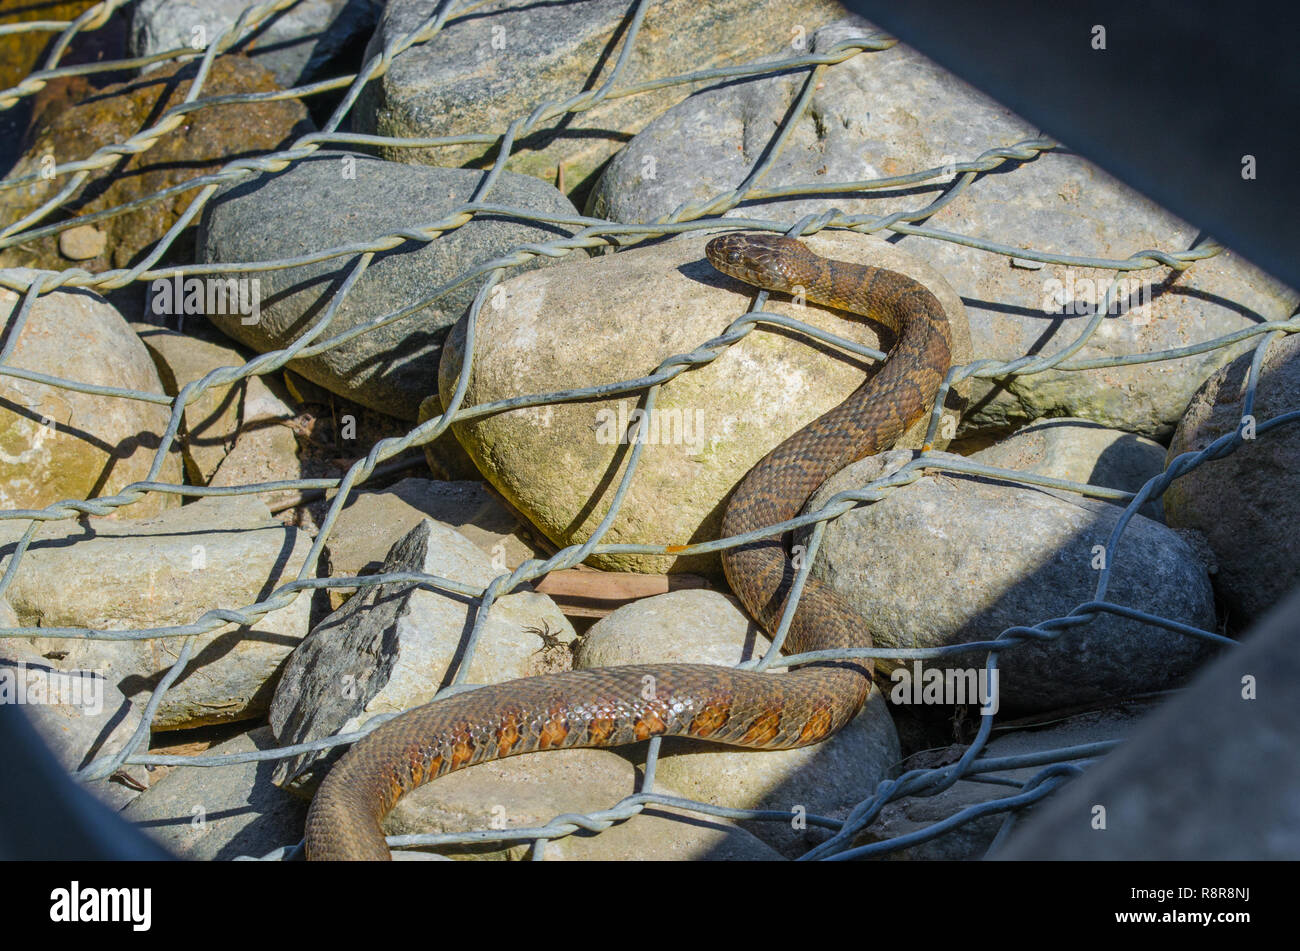 Northern water snake (Nerodia sipedon) large, nonvenomous, common snake in the family Colubridae, basks in sunlight on wired rocks. Stock Photo